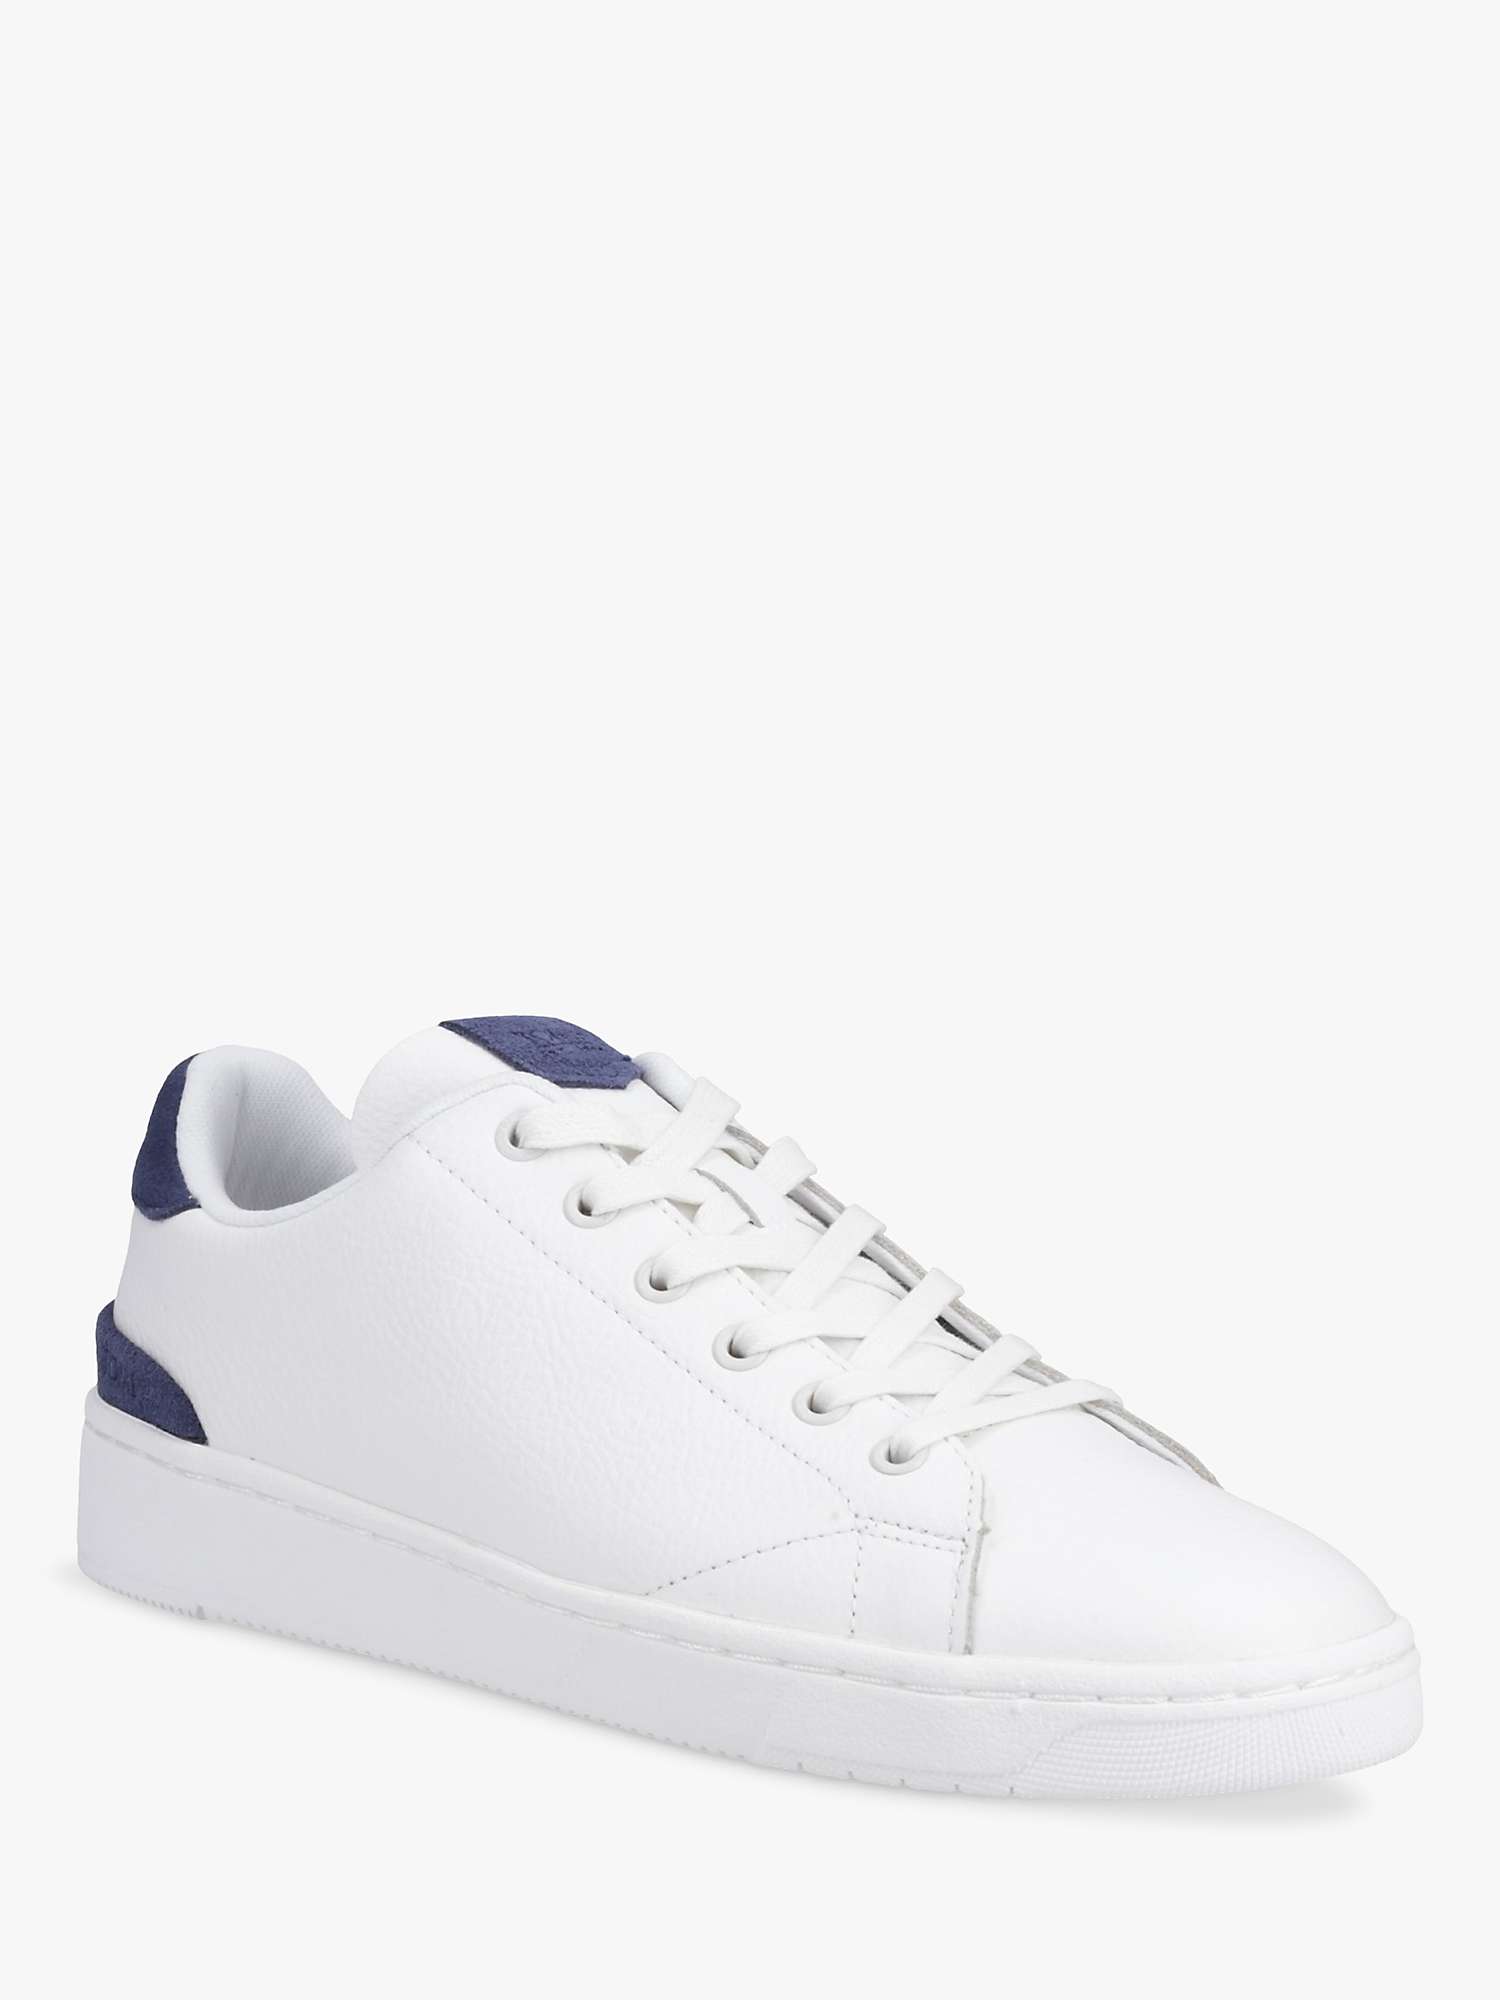 Buy TOMS Travel LITE 2.0 Low Trainers, White Online at johnlewis.com